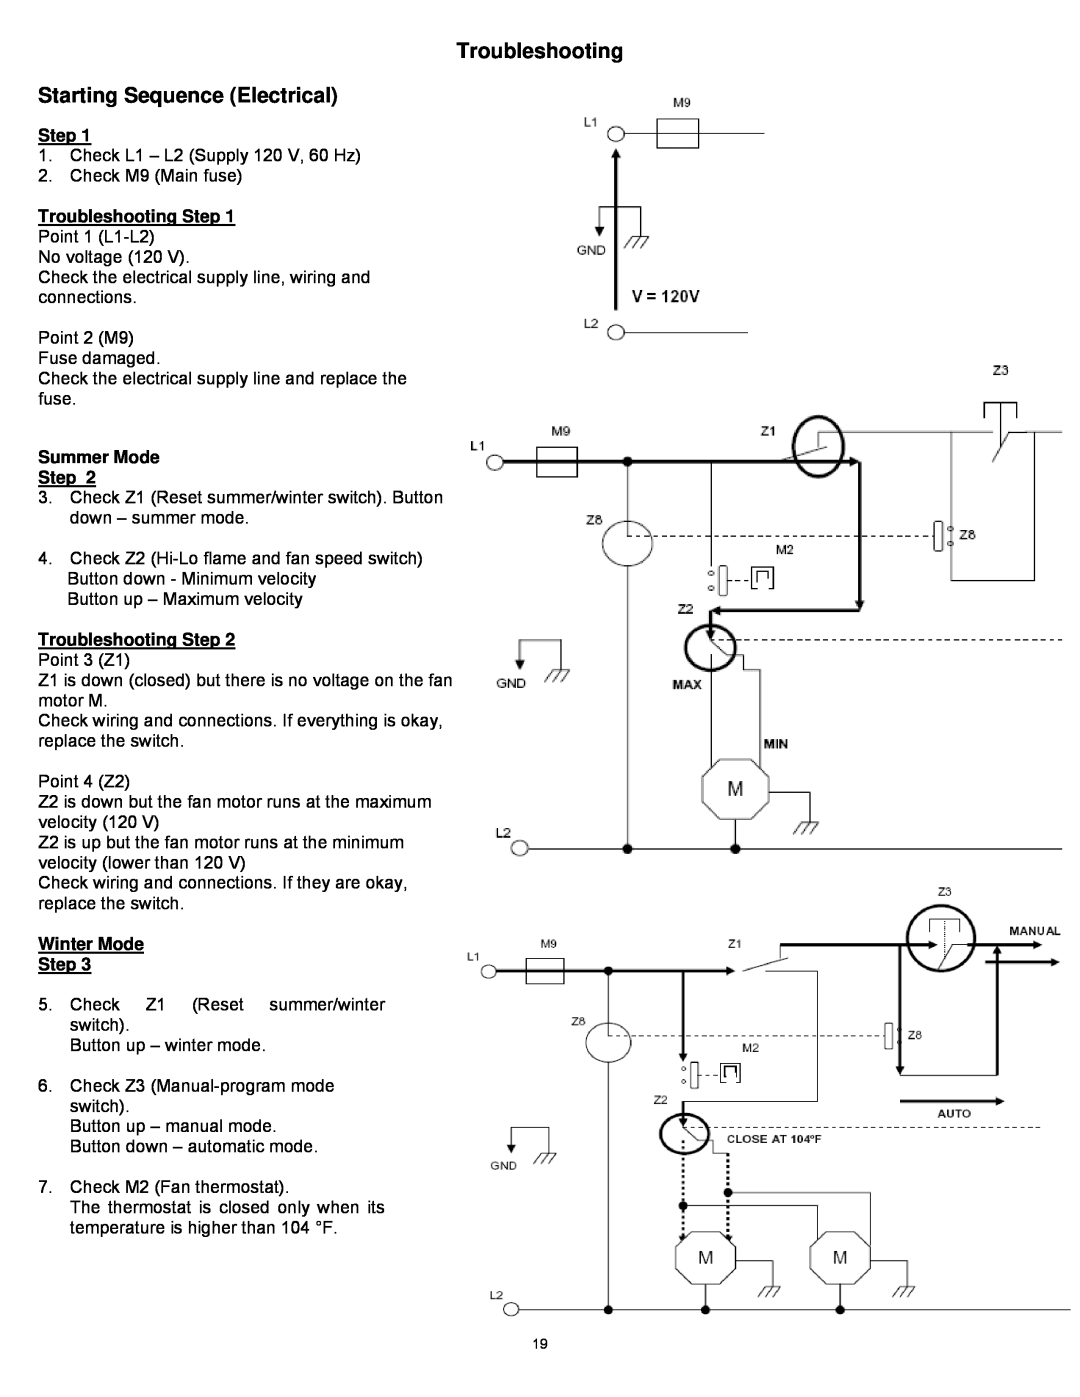 Williams 1773512, 1773511 Troubleshooting Starting Sequence Electrical, Troubleshooting Step, Summer Mode Step 